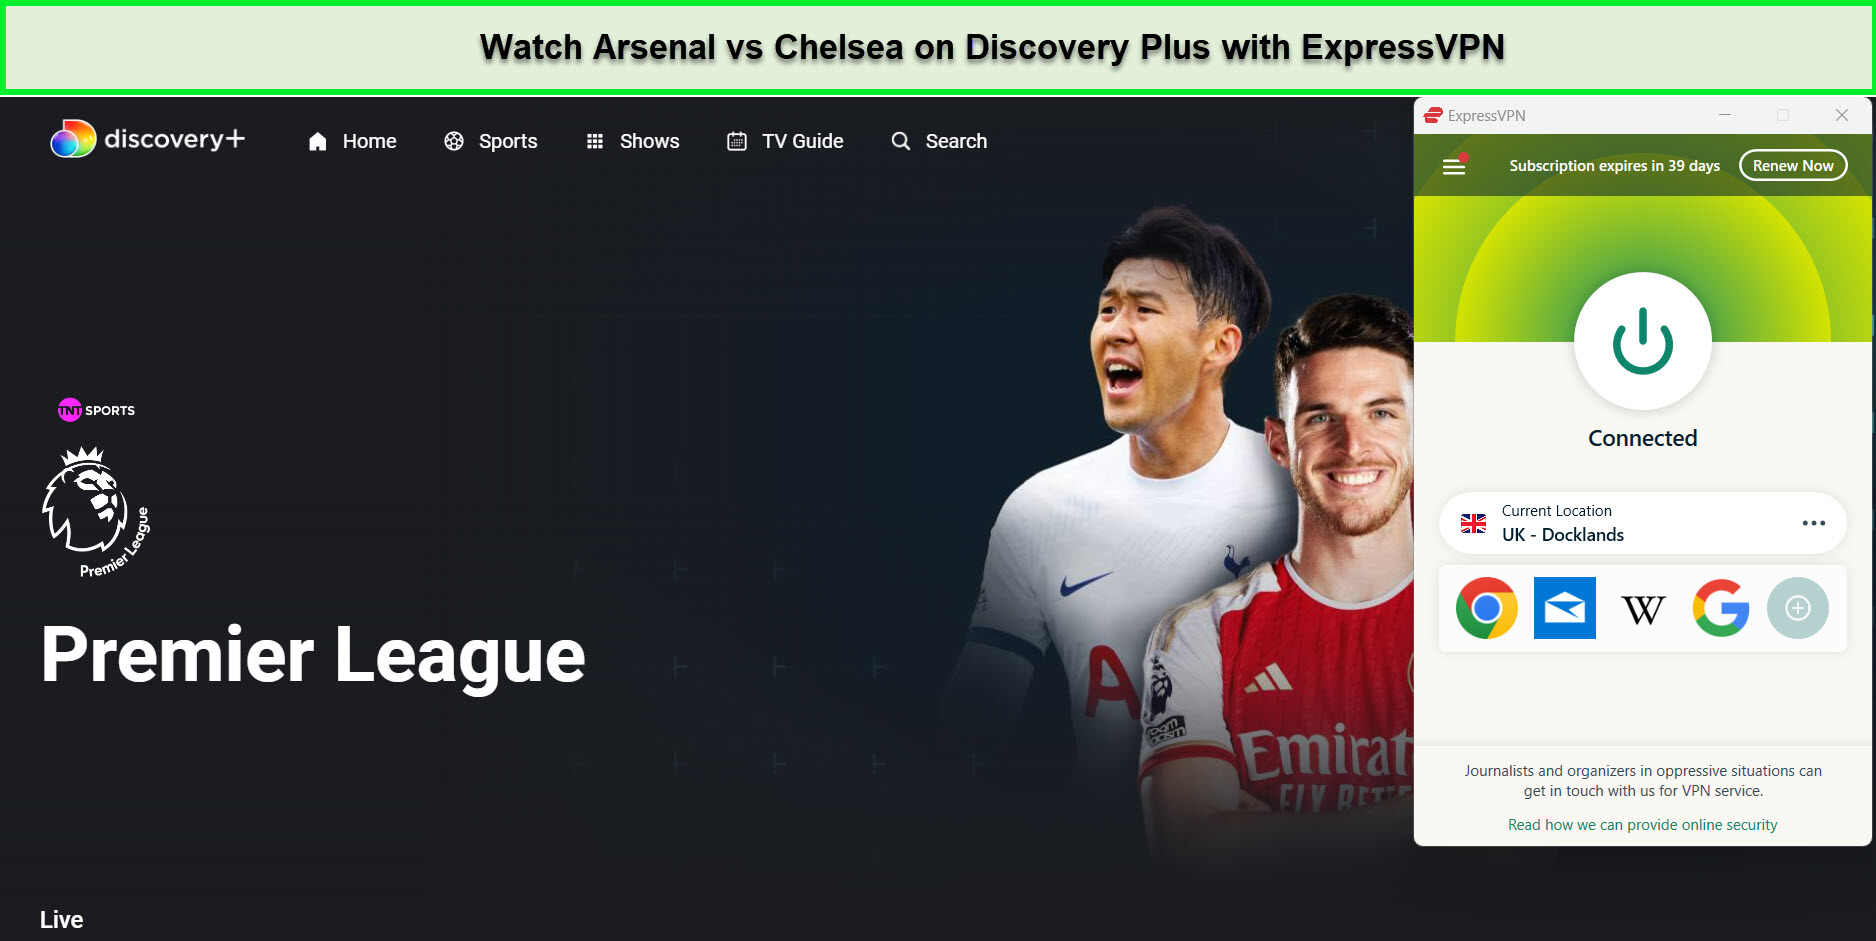 Watch-Arsenal-vs-Chelsea-outside-UK-on-Discovery-Plus-with-ExpressVPN